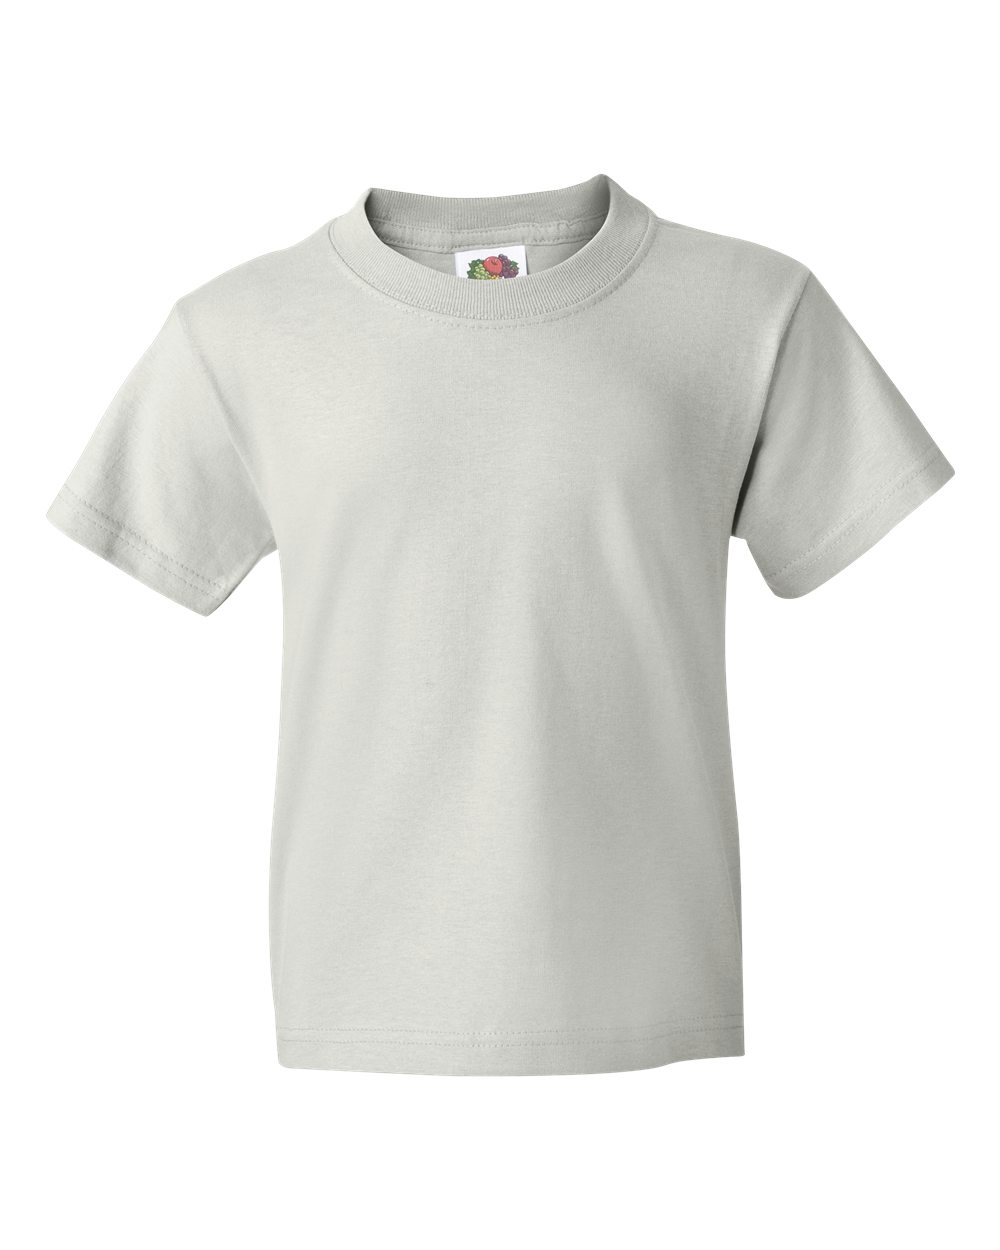 HD Cotton Youth Short Sleeve T-Shirt - 3930BR-